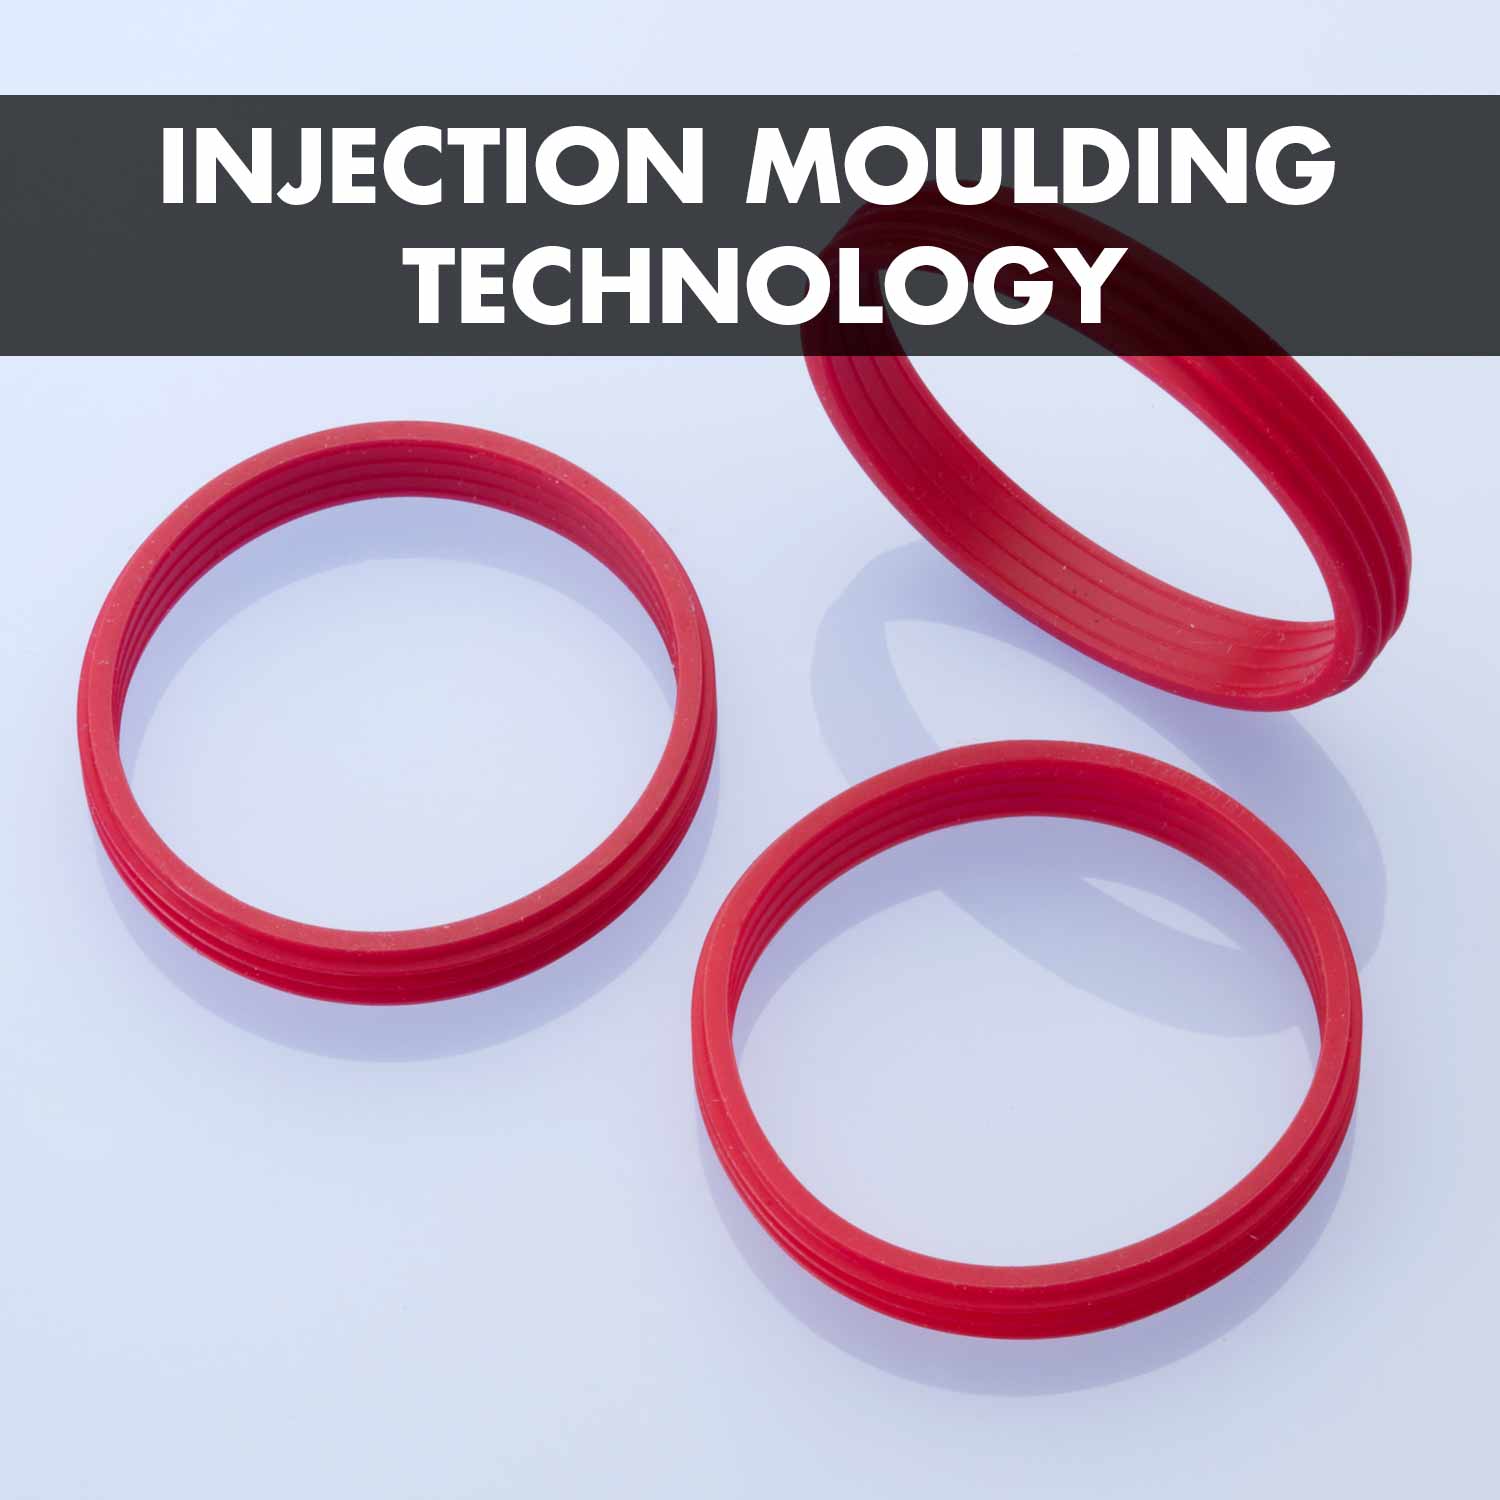 Injection moulding technology: Sealants and moulded parts manufactured in fully automatic mode.